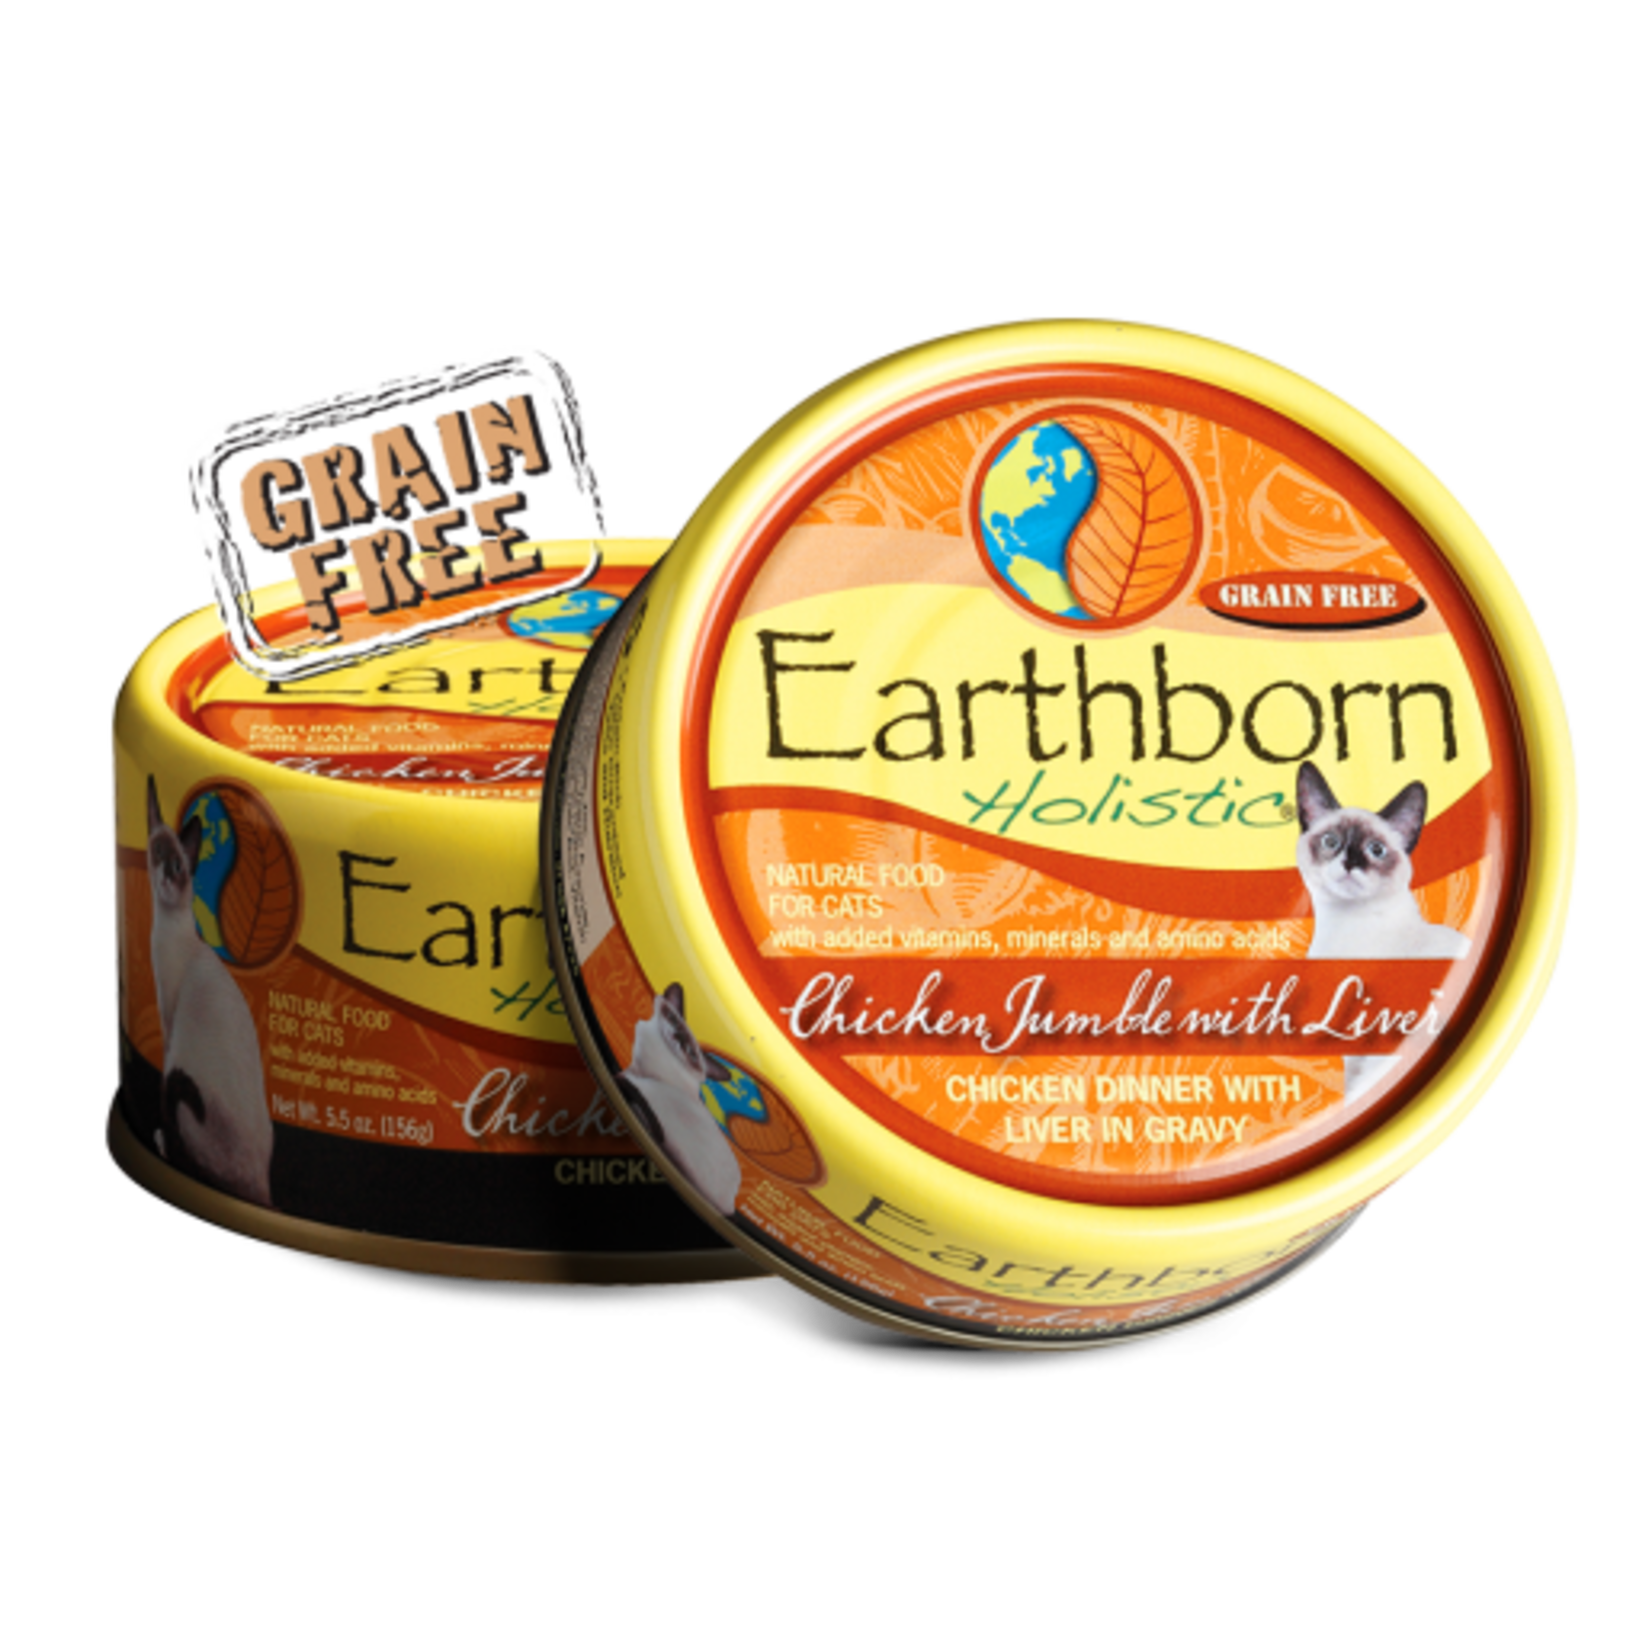 Earthborn Earthborn Wet Cat Food Chicken Jumble with Liver Chicken Dinner with Liver in Gravy.5oz Can Grain Free